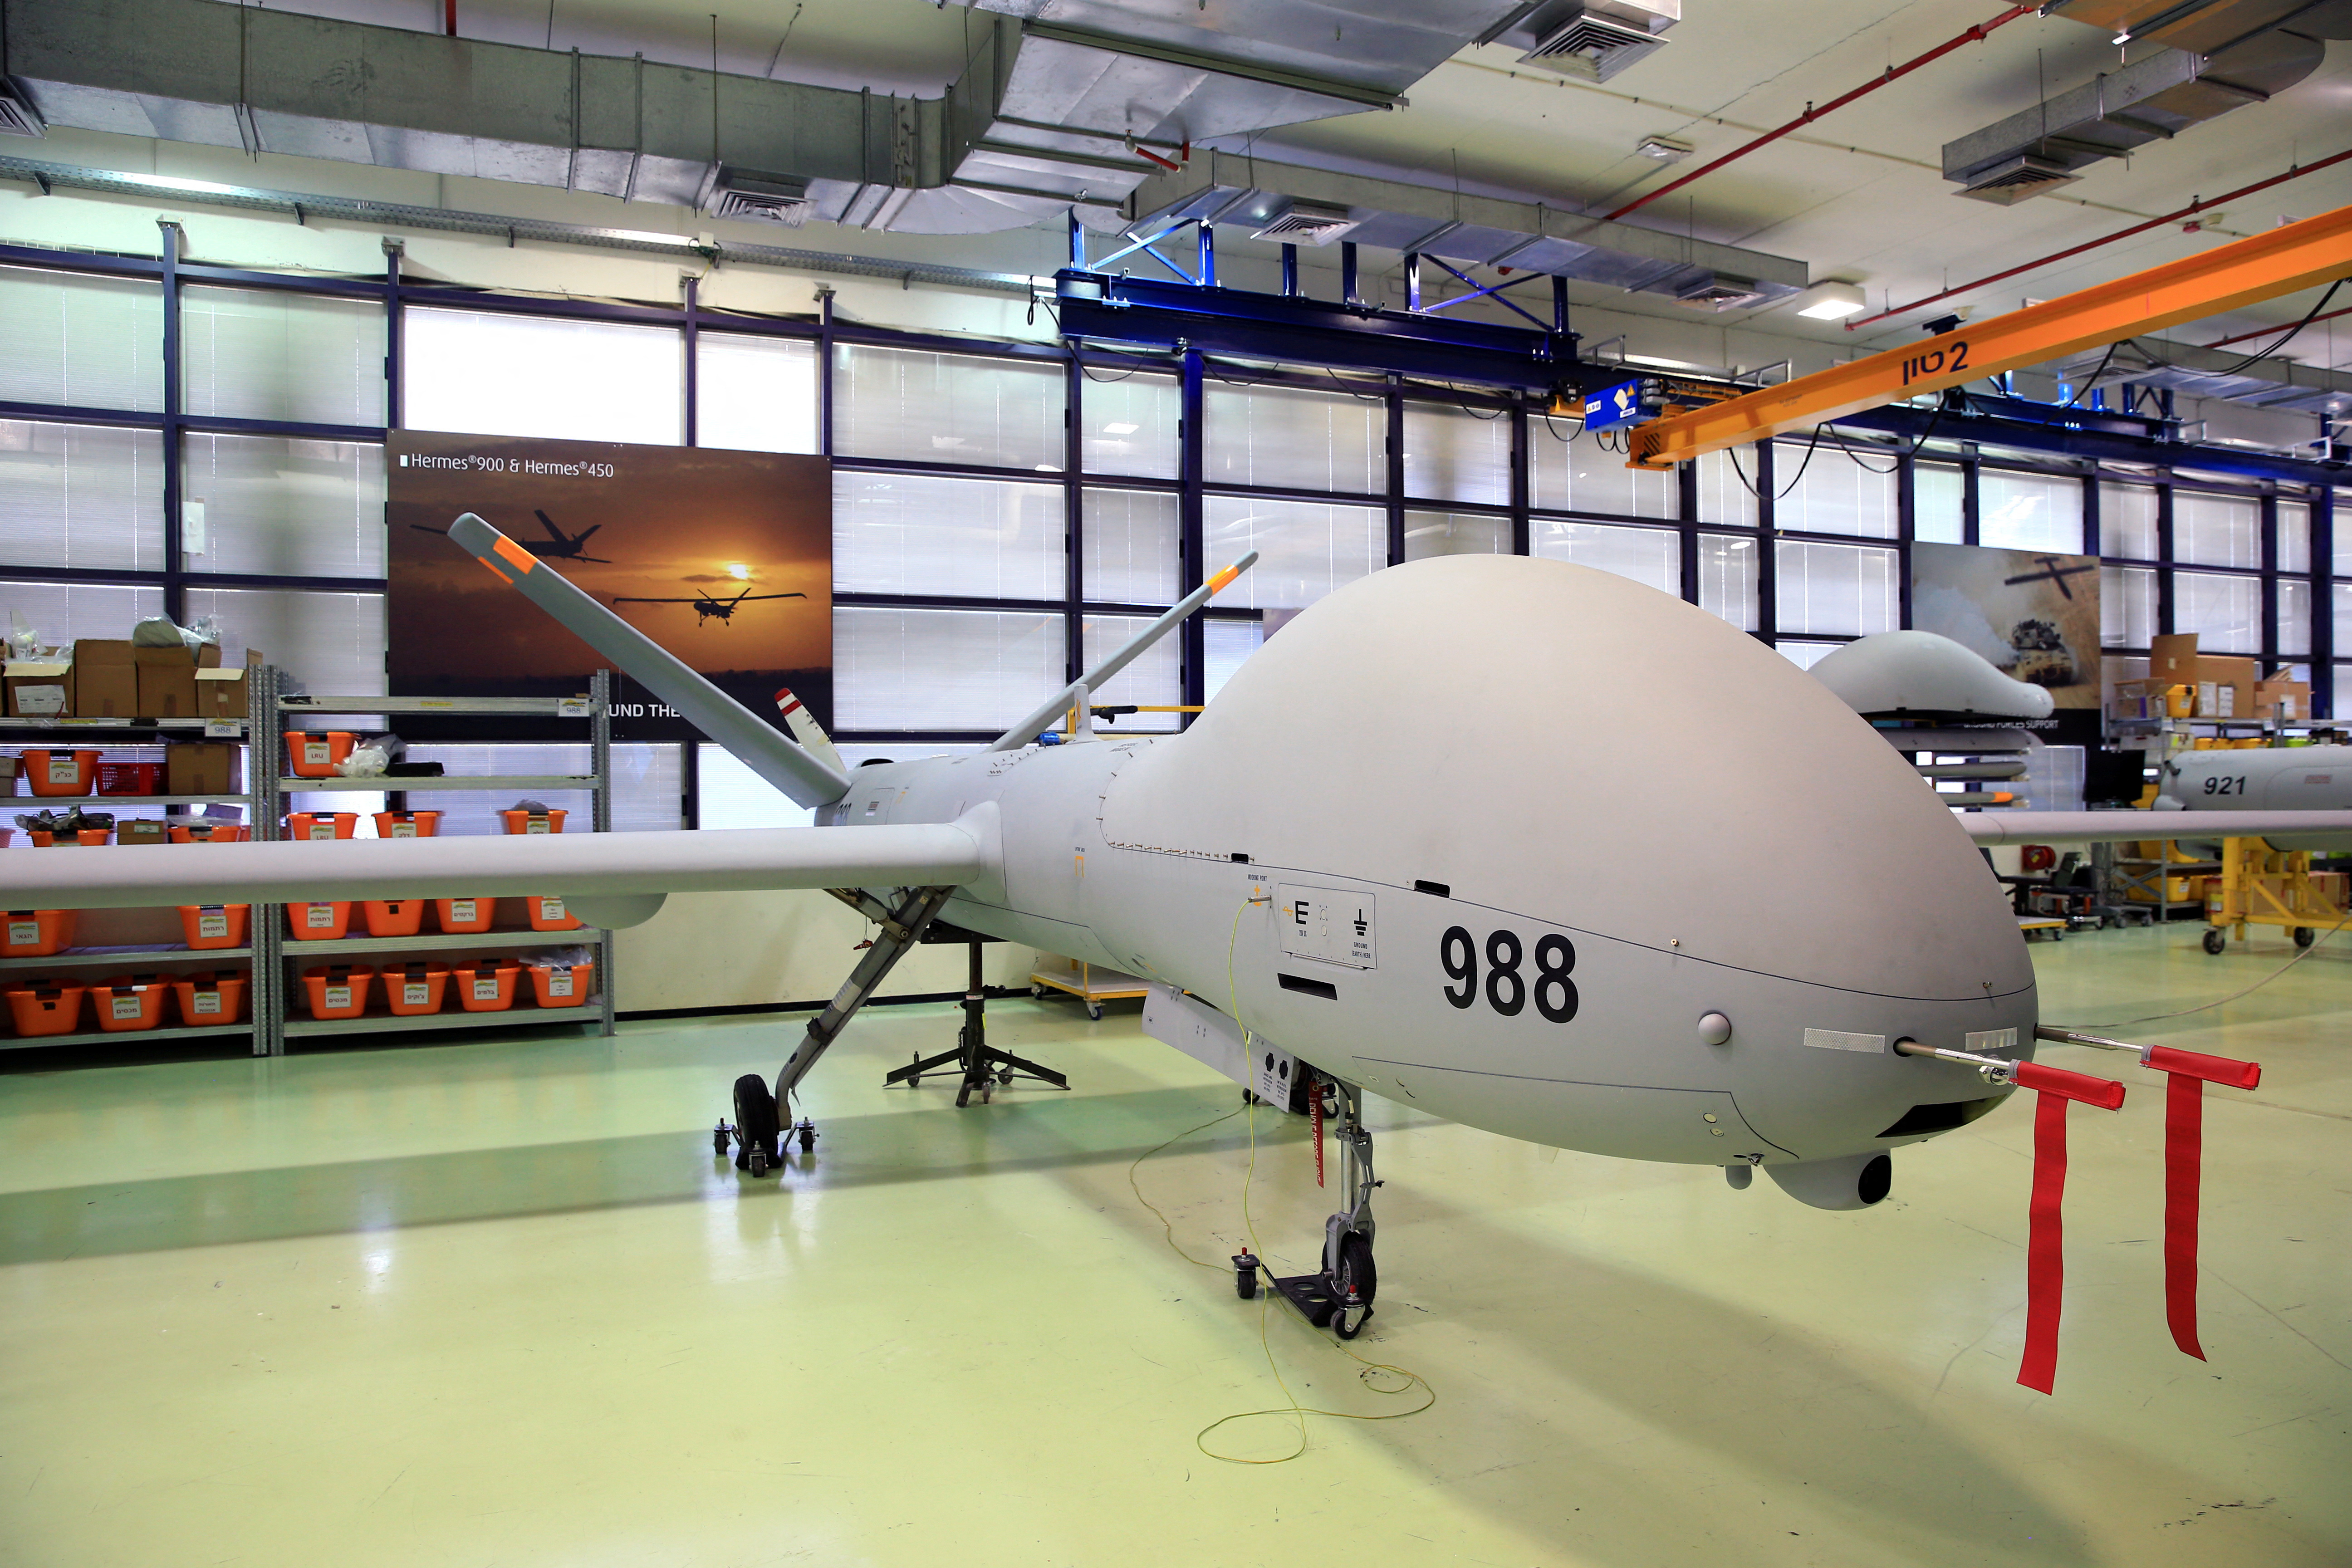 An Elbit Systems Ltd. Hermes 900 unmanned aerial vehicle (UAV) is seen at the company's drone factory in Rehovot